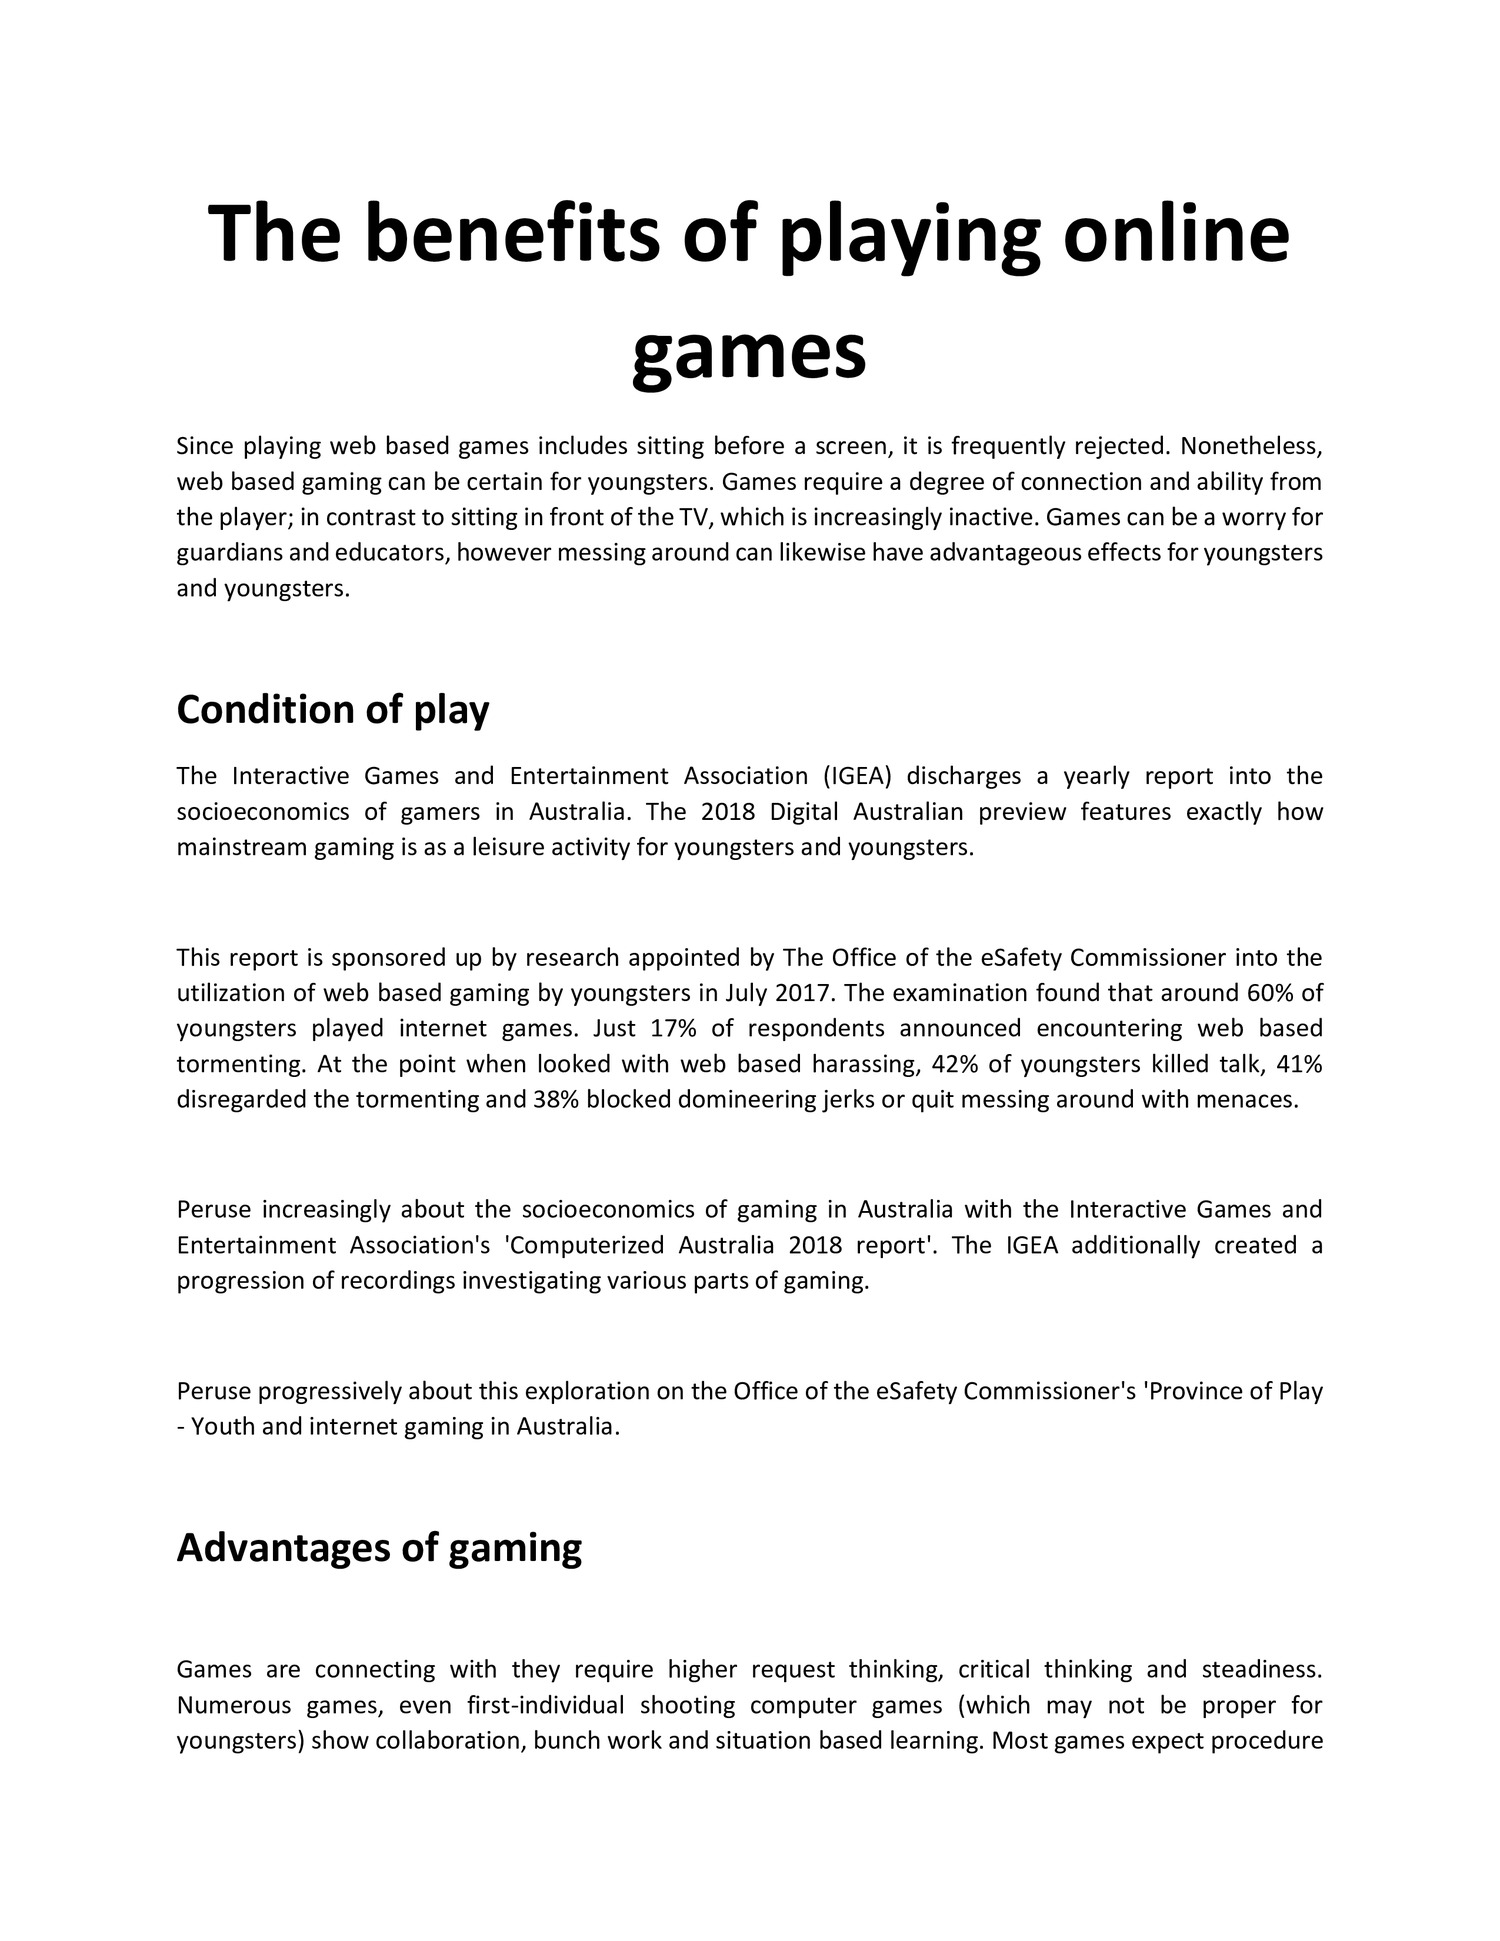 The Advantages of Playing Free Games Online